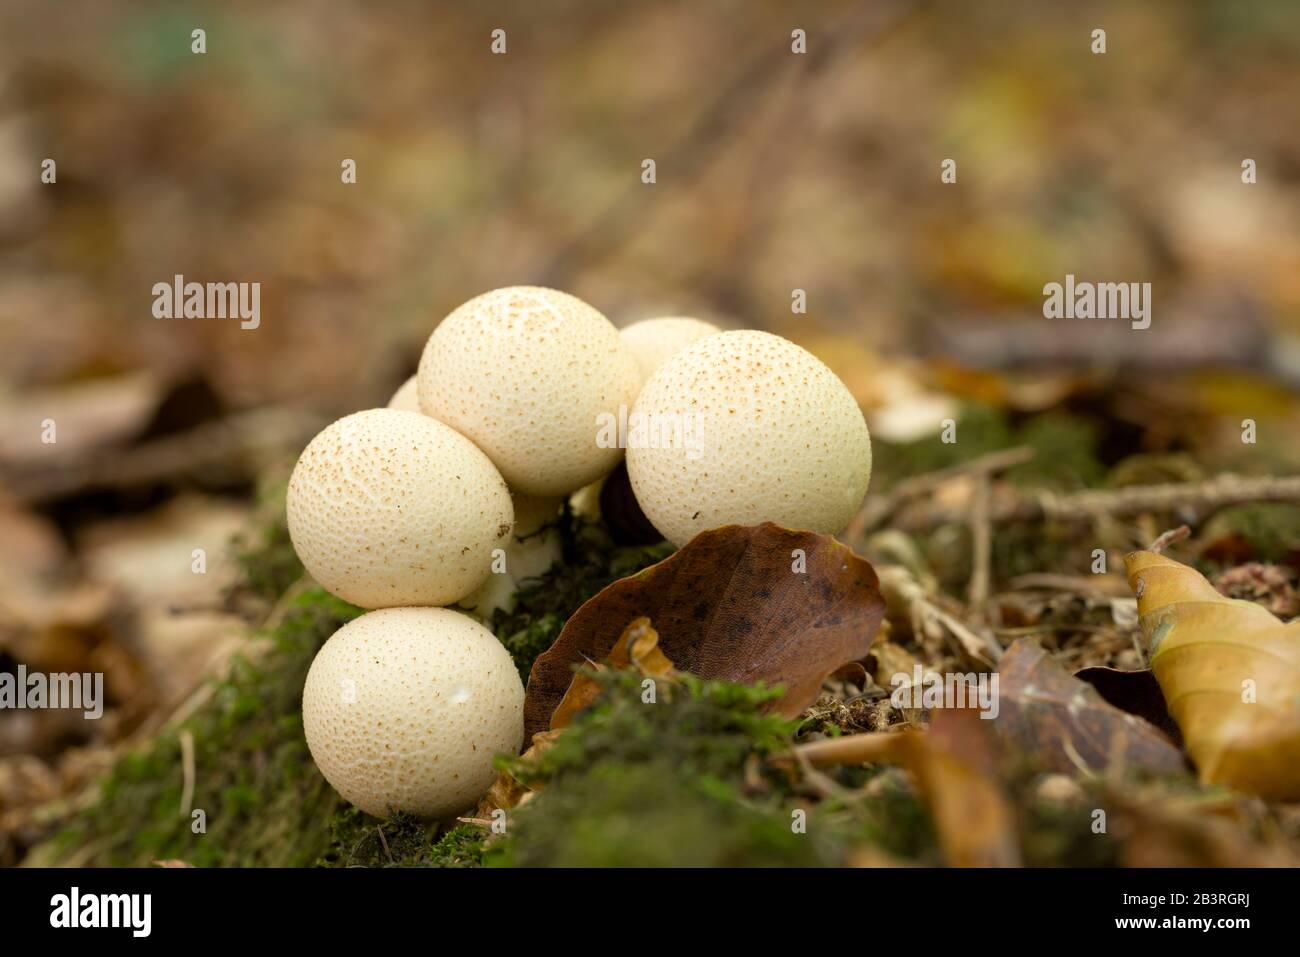 Stump Puffball (Lycoperdon pyriforme) mushrooms growing on dead wood in leaf litter. Also known as Pear-shaped Puffball. Stock Photo